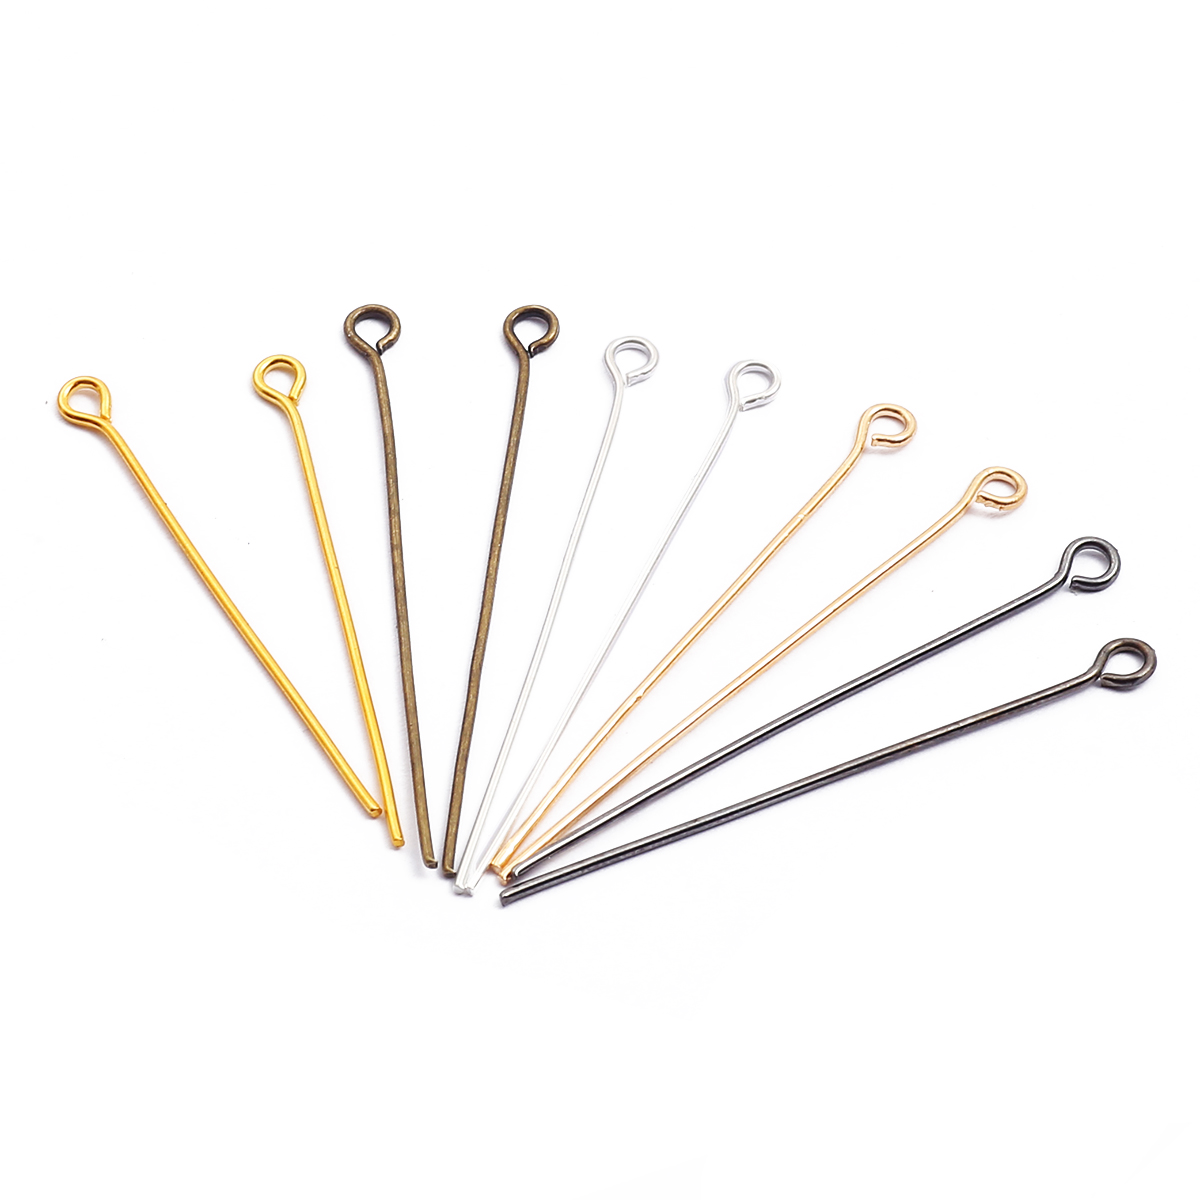 200pcs Head Eye Pins 16/20/24/30/35/40/45/50mm Eye Pins Needles Beads  Supplies DIY Jewelry Making Accessories Findings Accessories